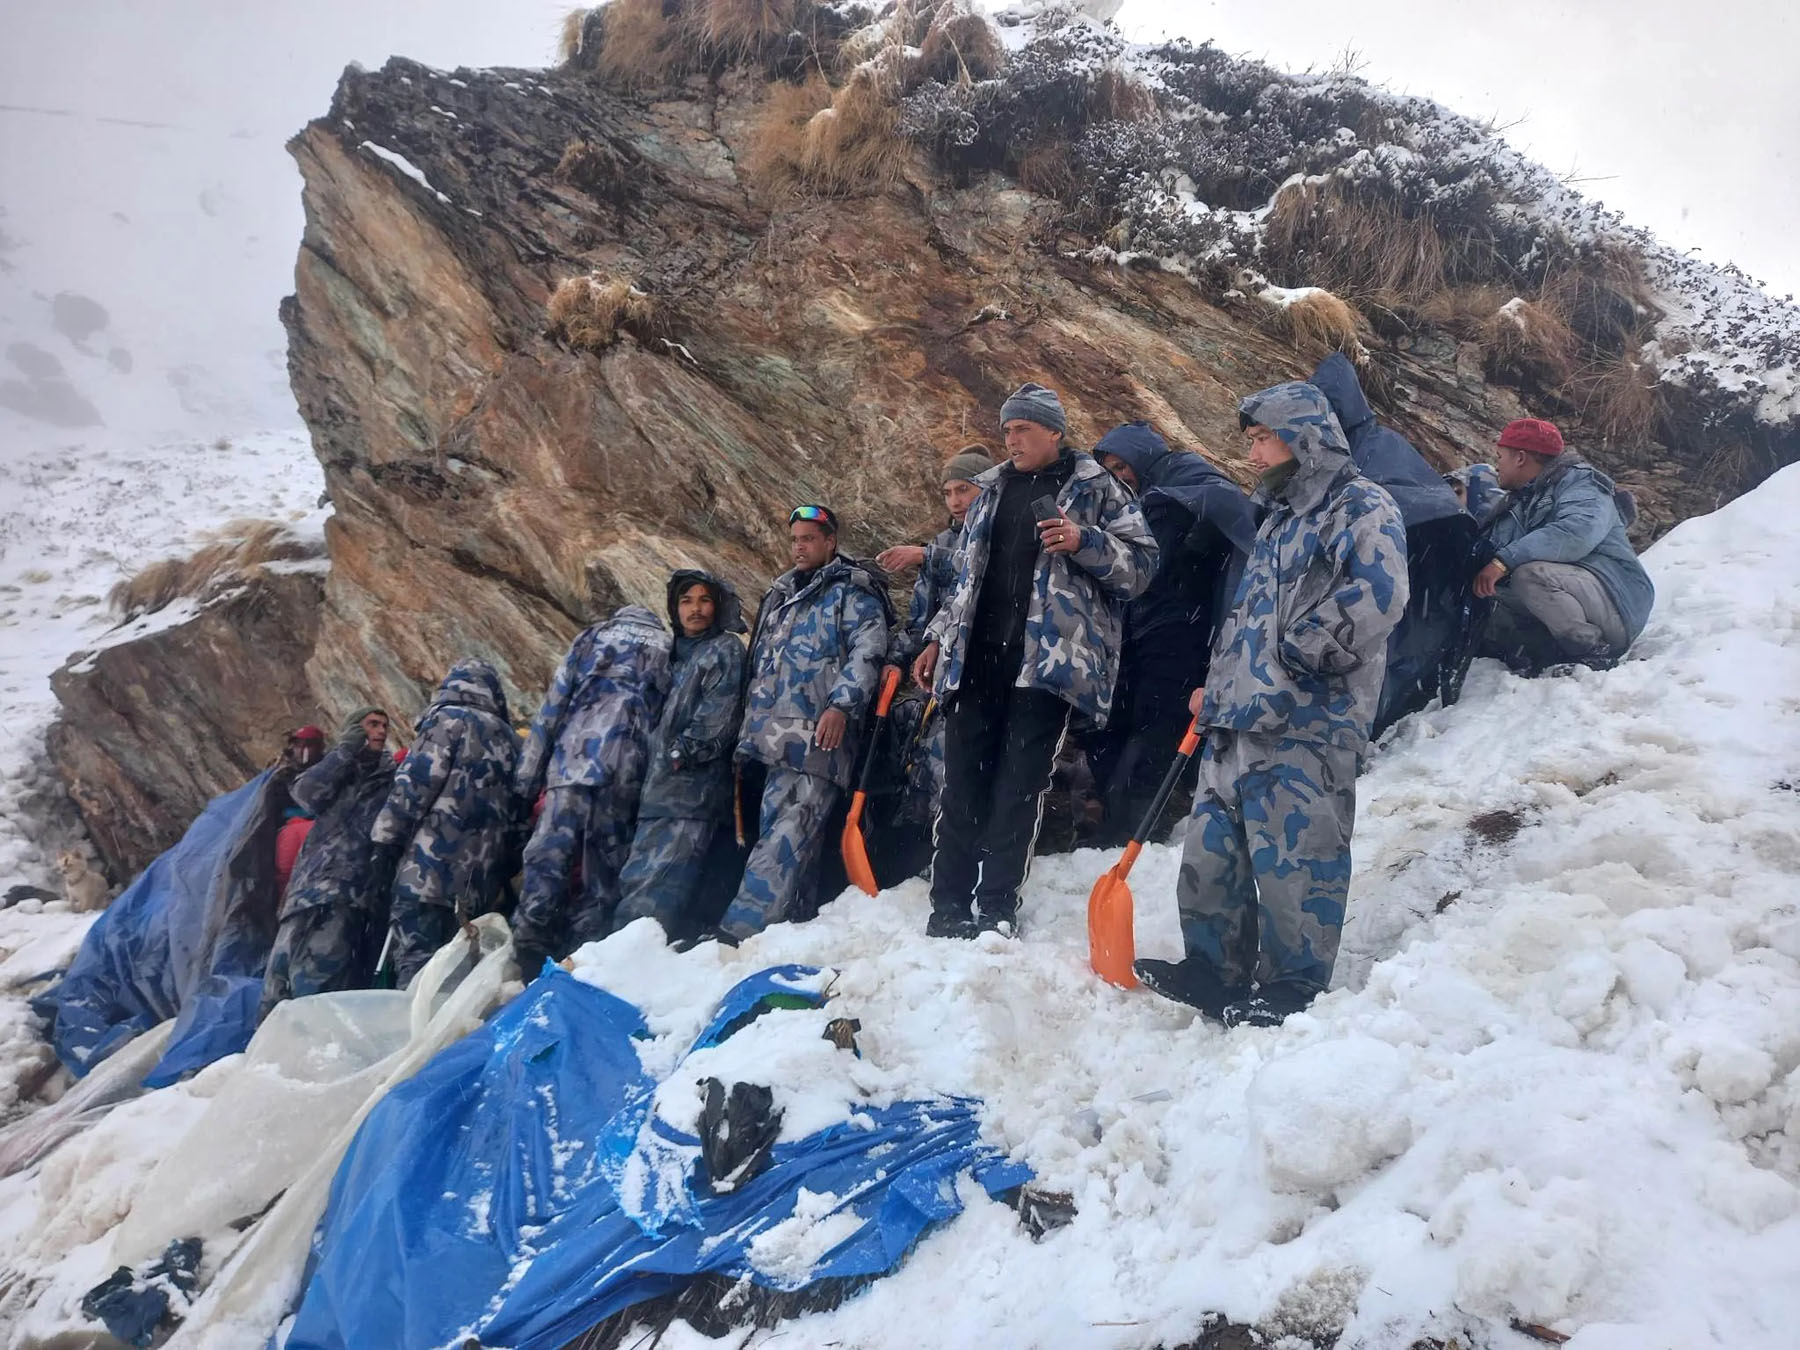 Mugu avalanche update: Snowfall obstructs rescue team from reaching avalanche site